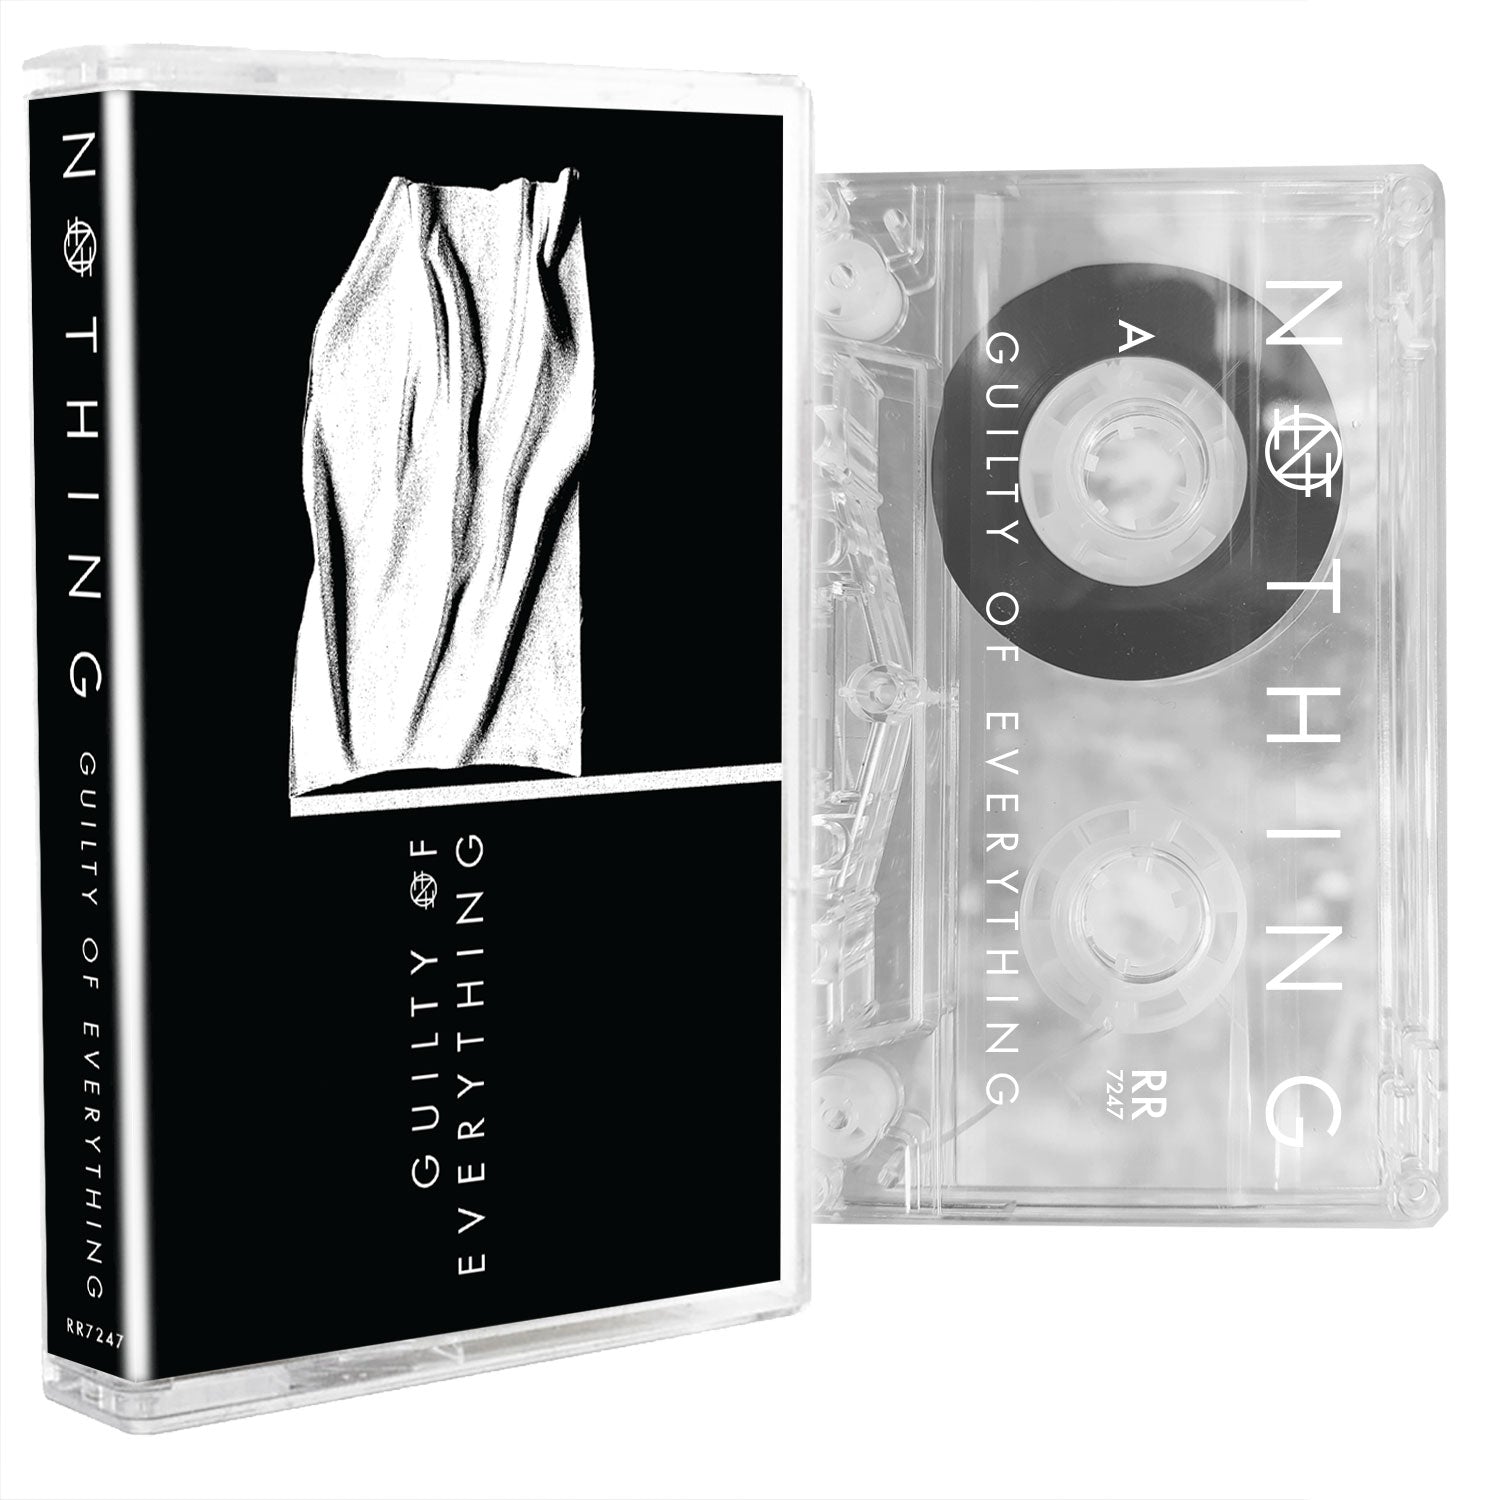 Nothing "Guilty Of Everything" Cassette